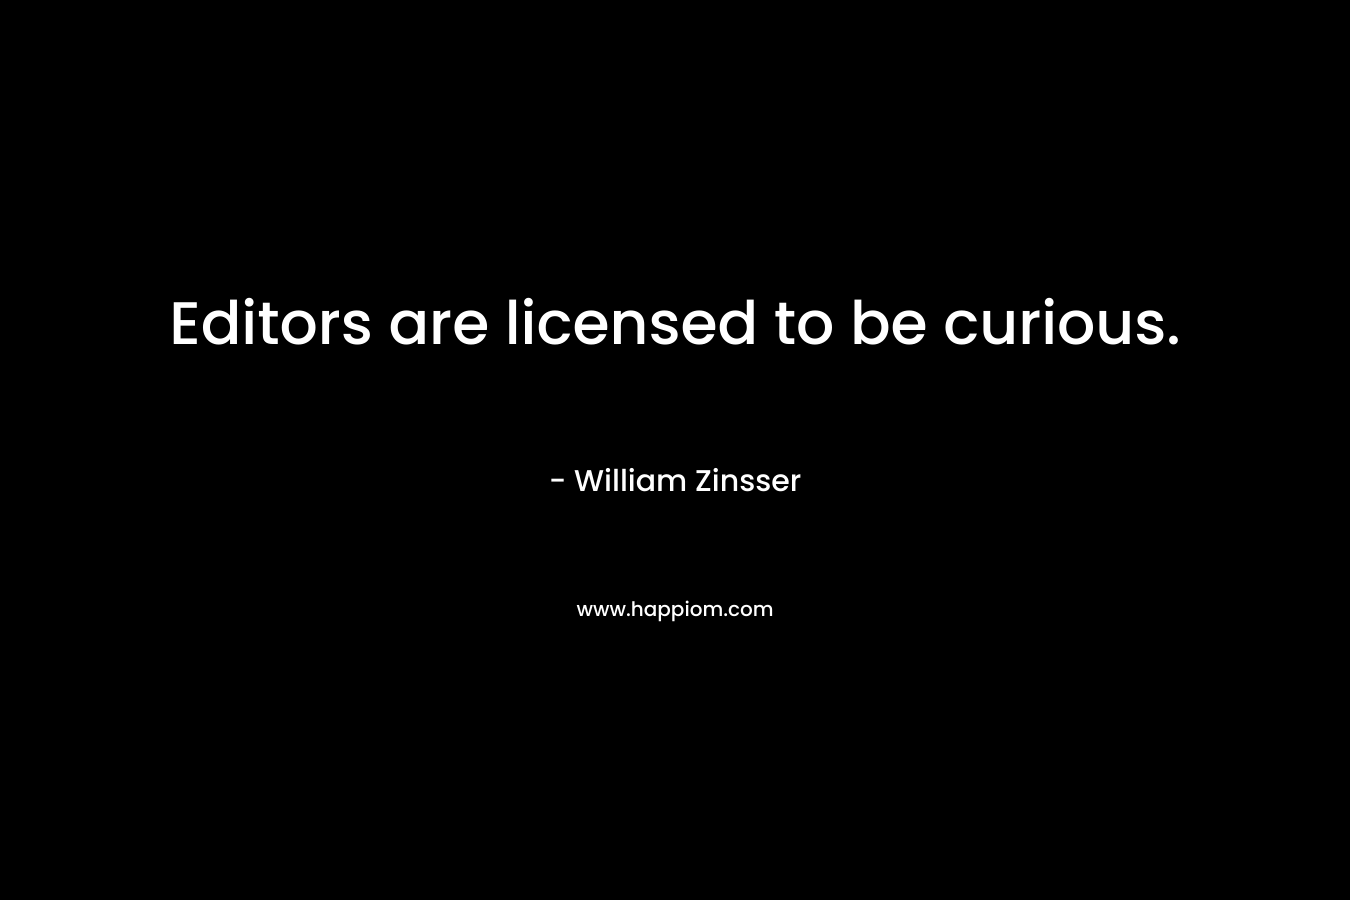 Editors are licensed to be curious.